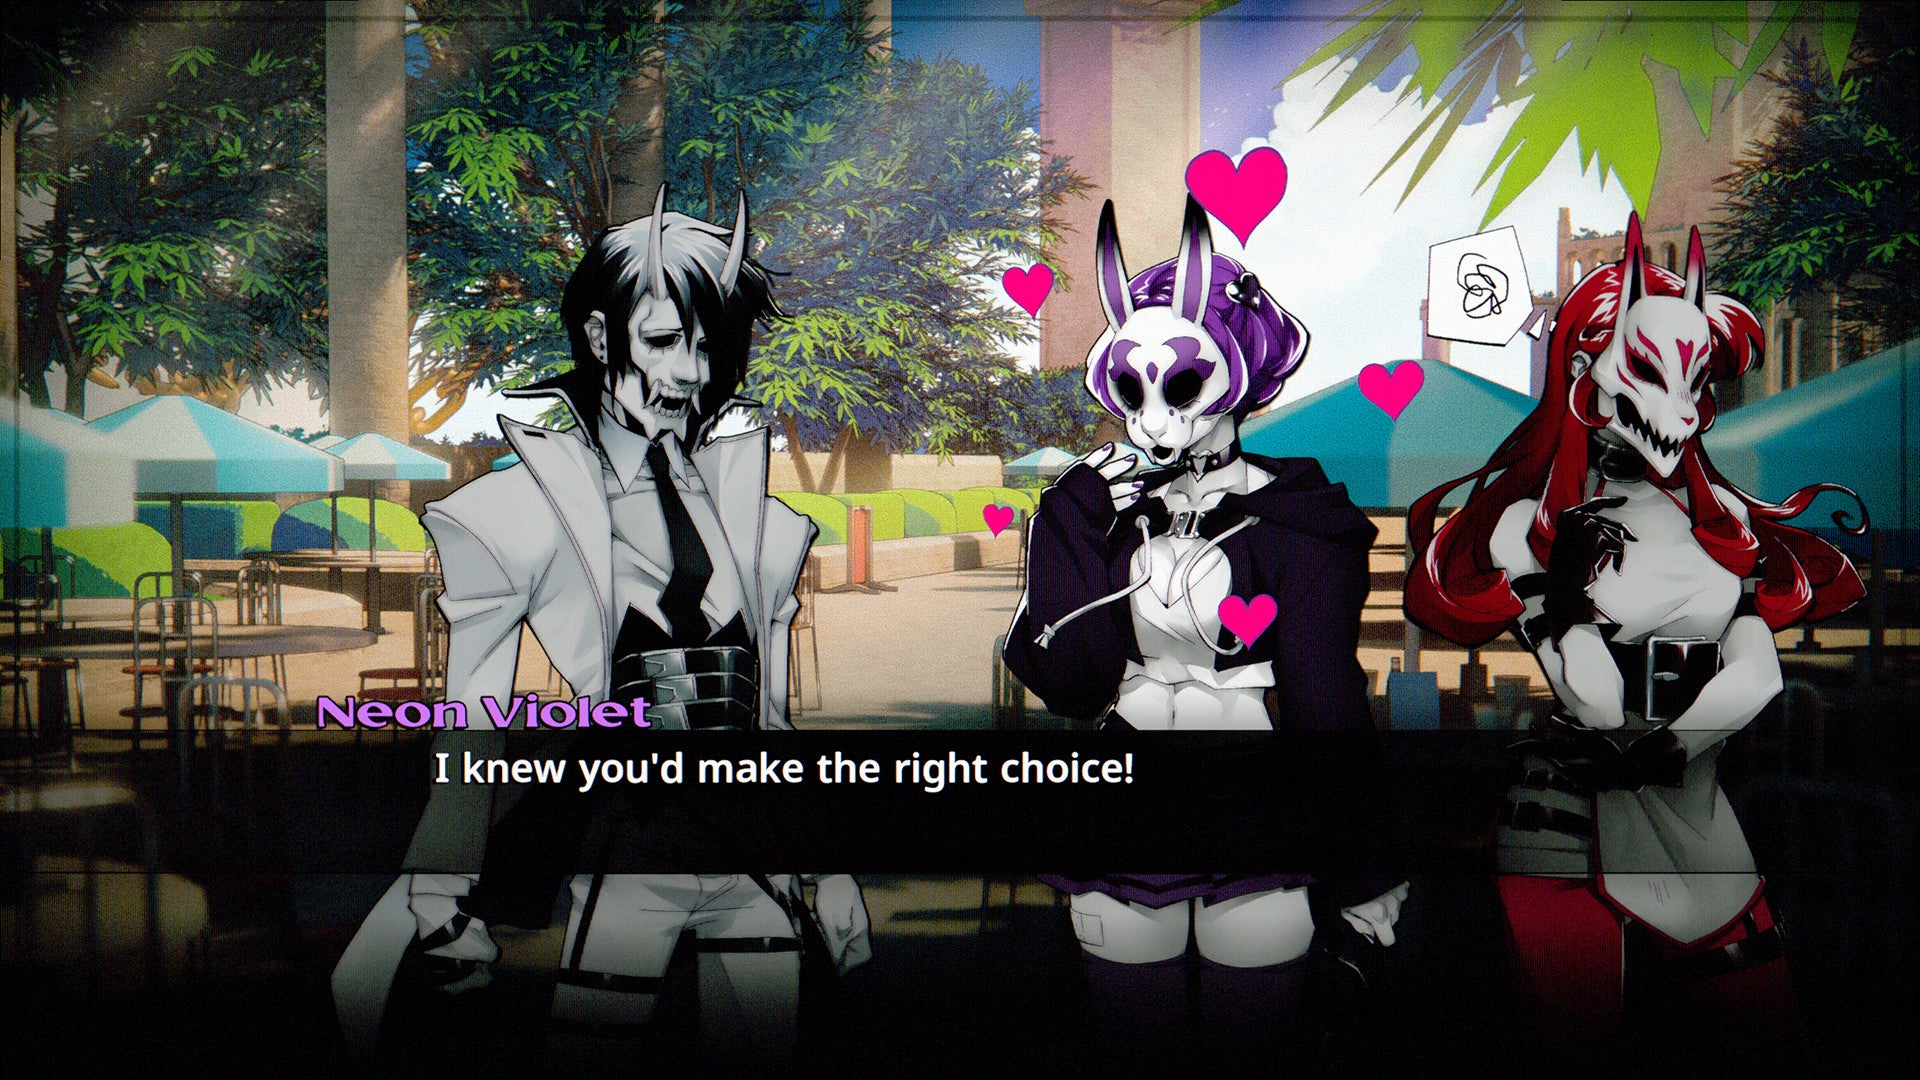 Neon White is shown to have dating sim elements throughout the game.